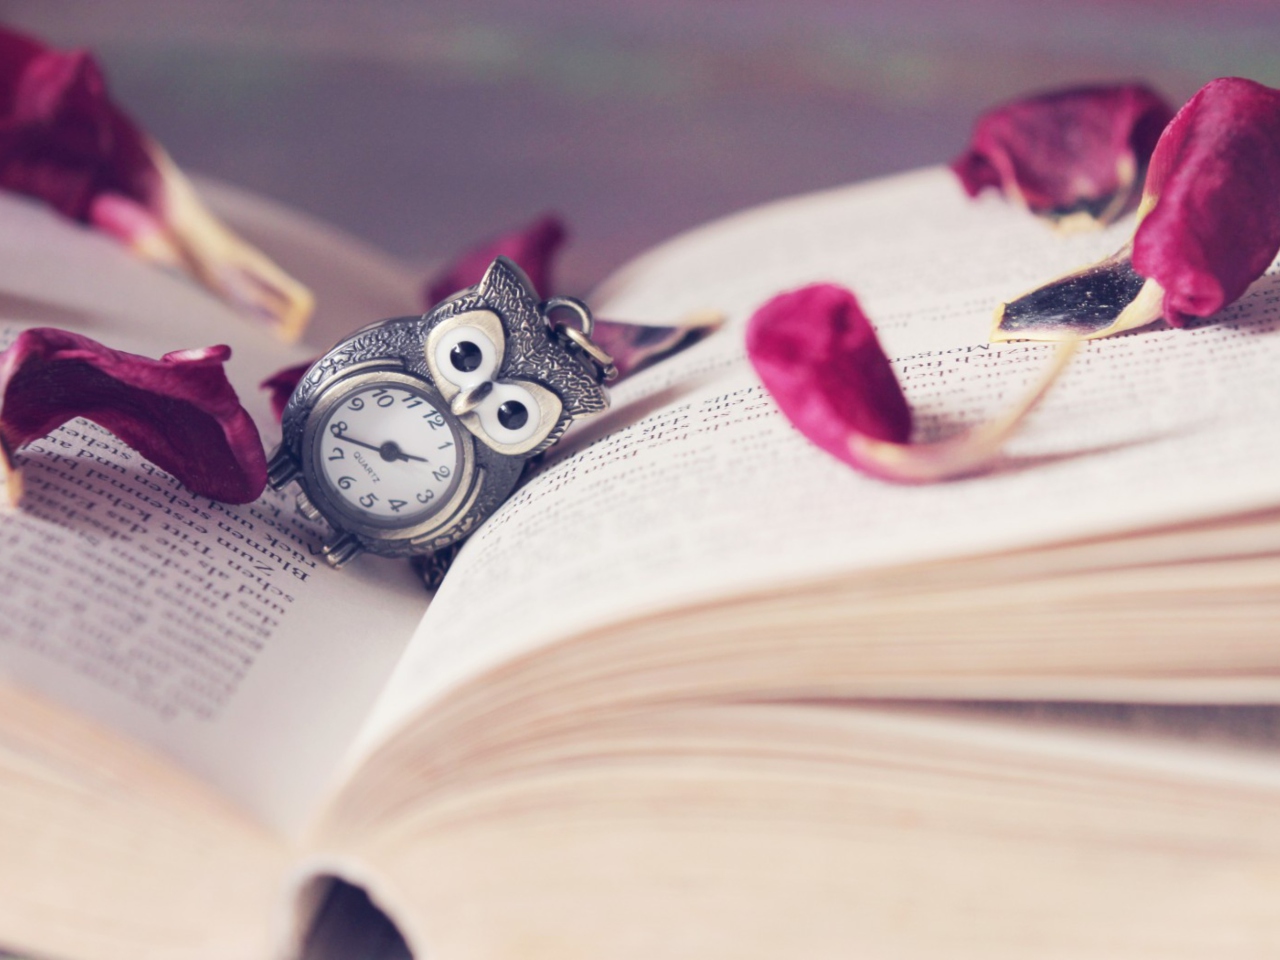 Vintage Owl Watch And Book wallpaper 1280x960